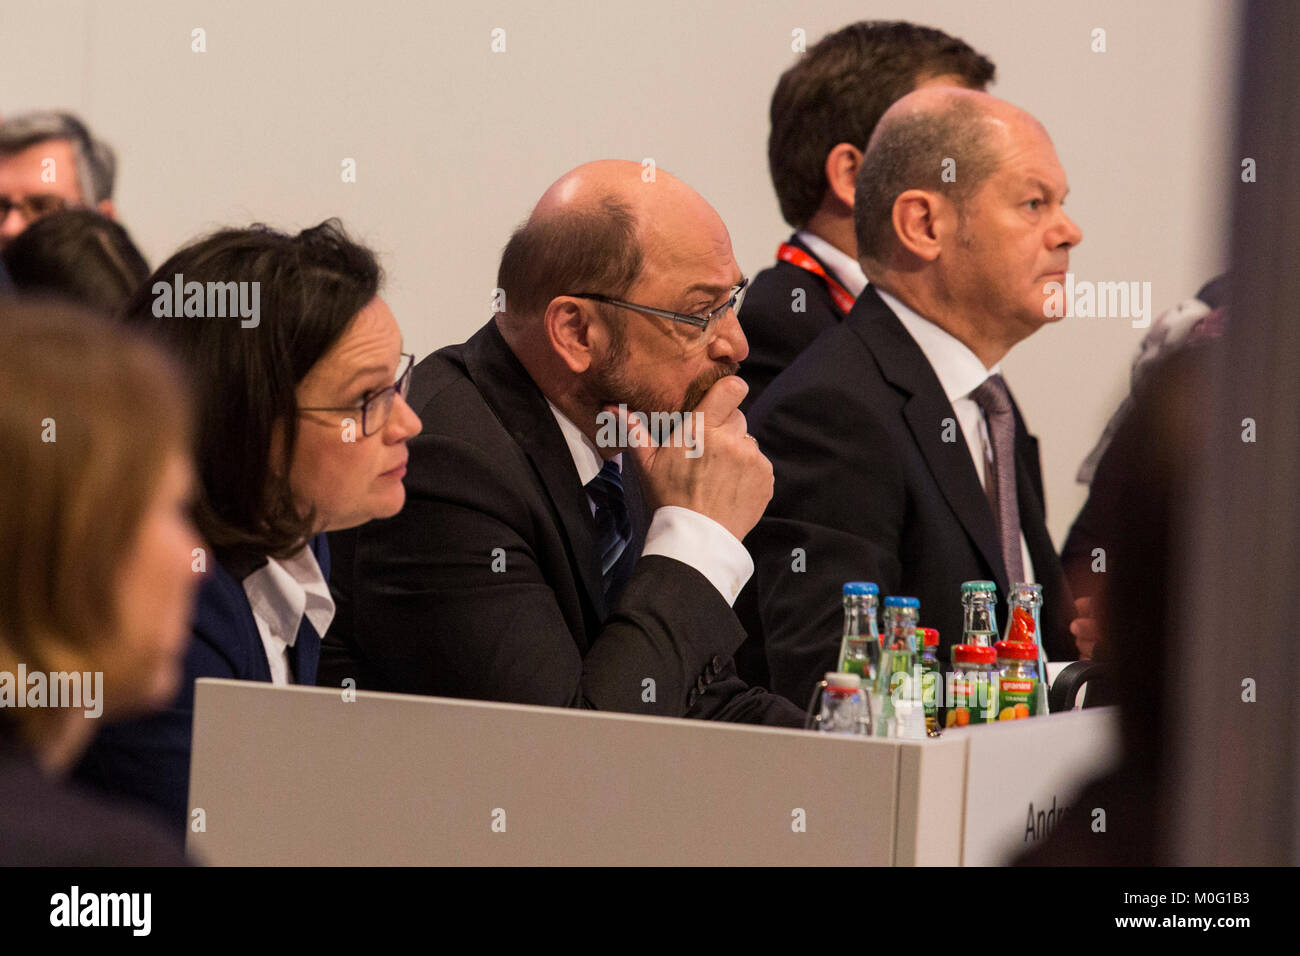 Bonn, Germany. 21 January 2018. L-R: Andrea Nahles, Martin Schulz, Olaf Scholz. SPD extraordinary party convention at World Conference Center Bonn to discuss and approve options to enter into a grand coalition with the CDU, Christian Democrats, before asking SPD members for approval. Stock Photo